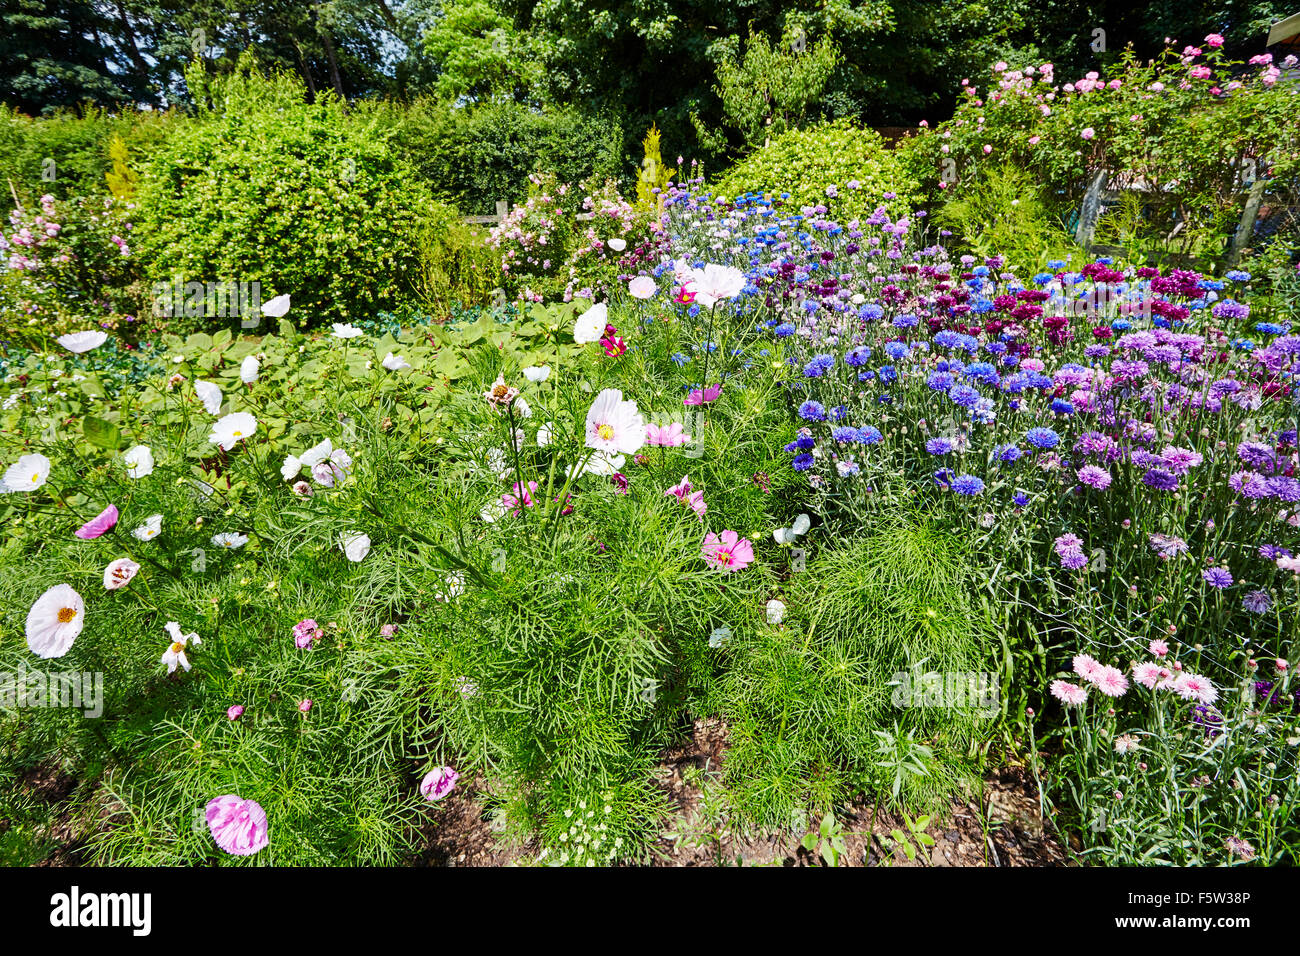 Summer flowers in the gardens of Easton Walled Gardens, Easton, Grantham, Lincolnshire, England, UK. Stock Photo